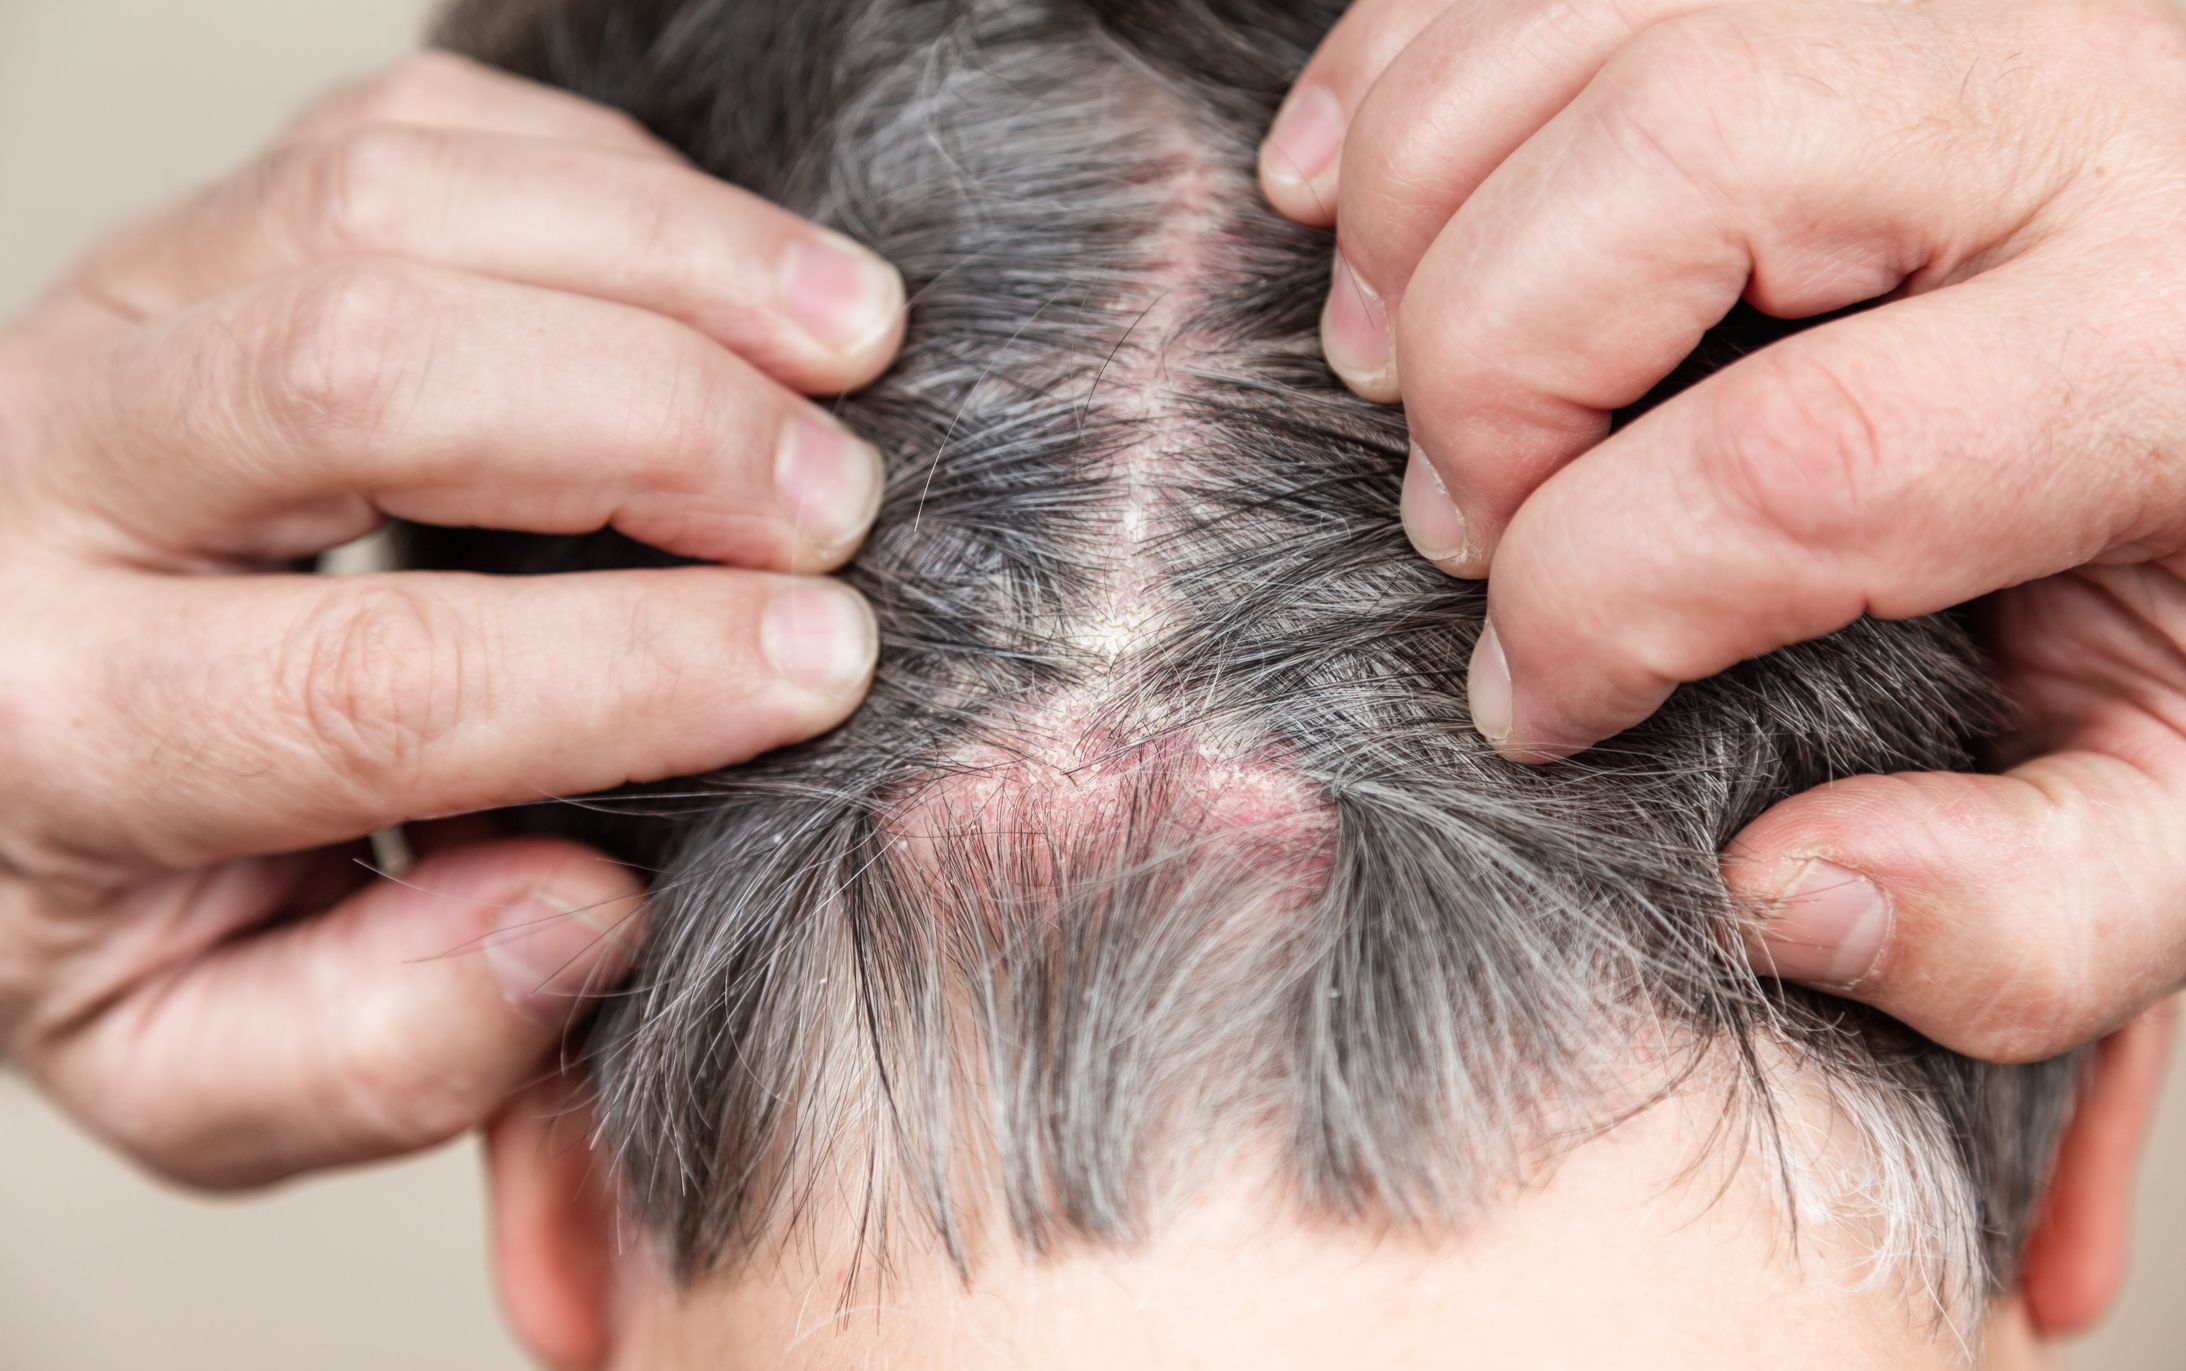 18 Causes of Hair Loss, and How to Treat It